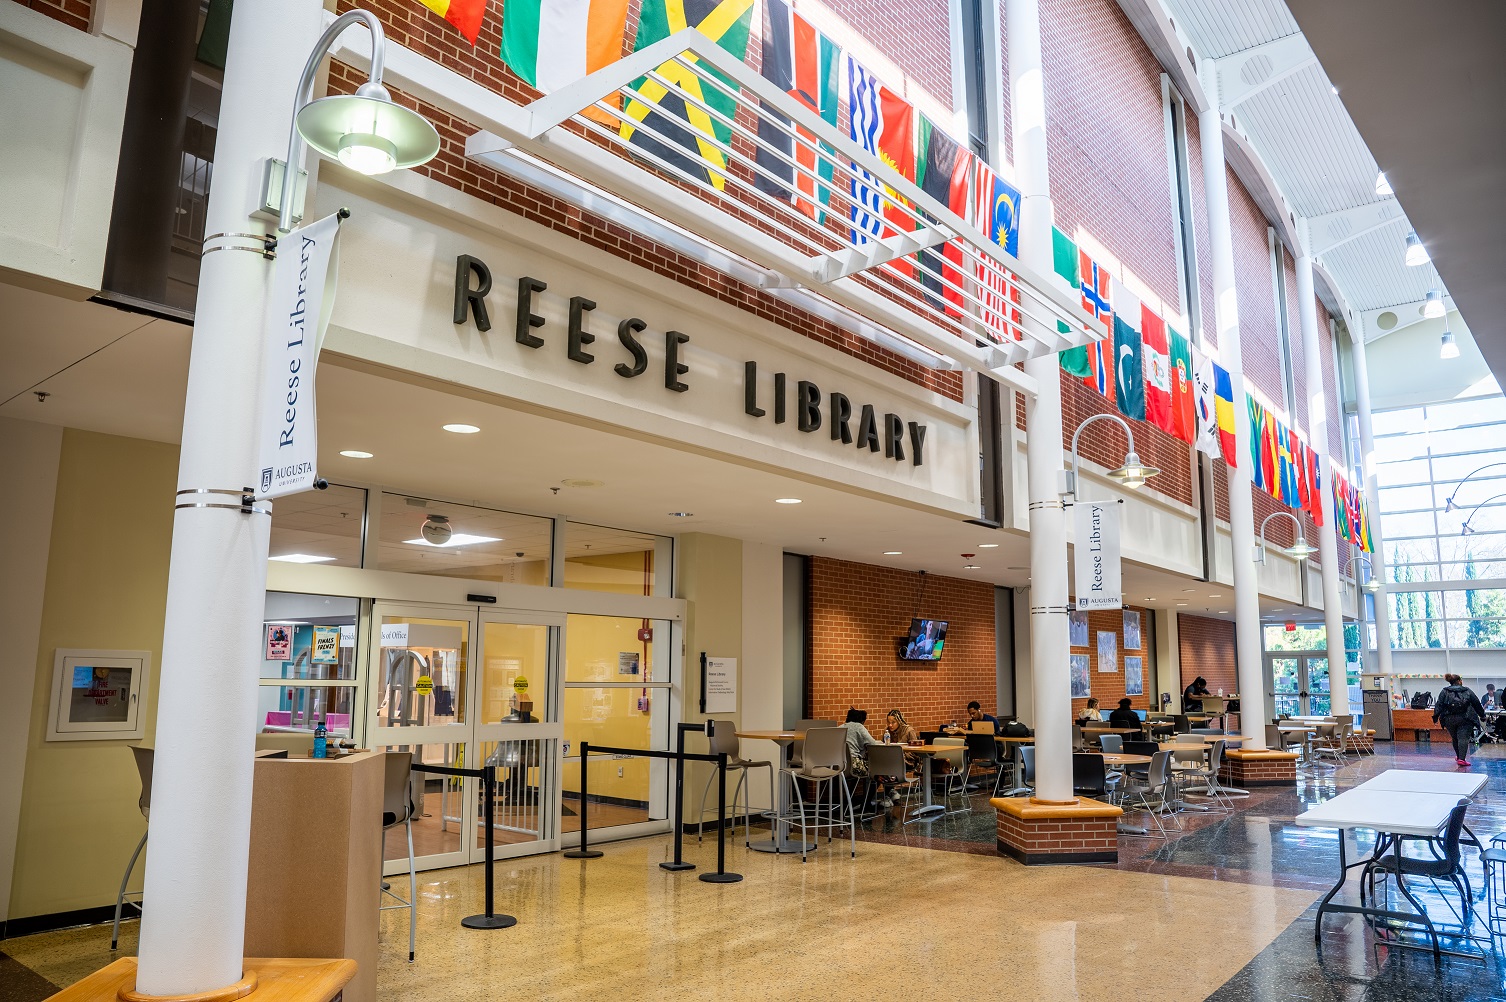 Reese Library